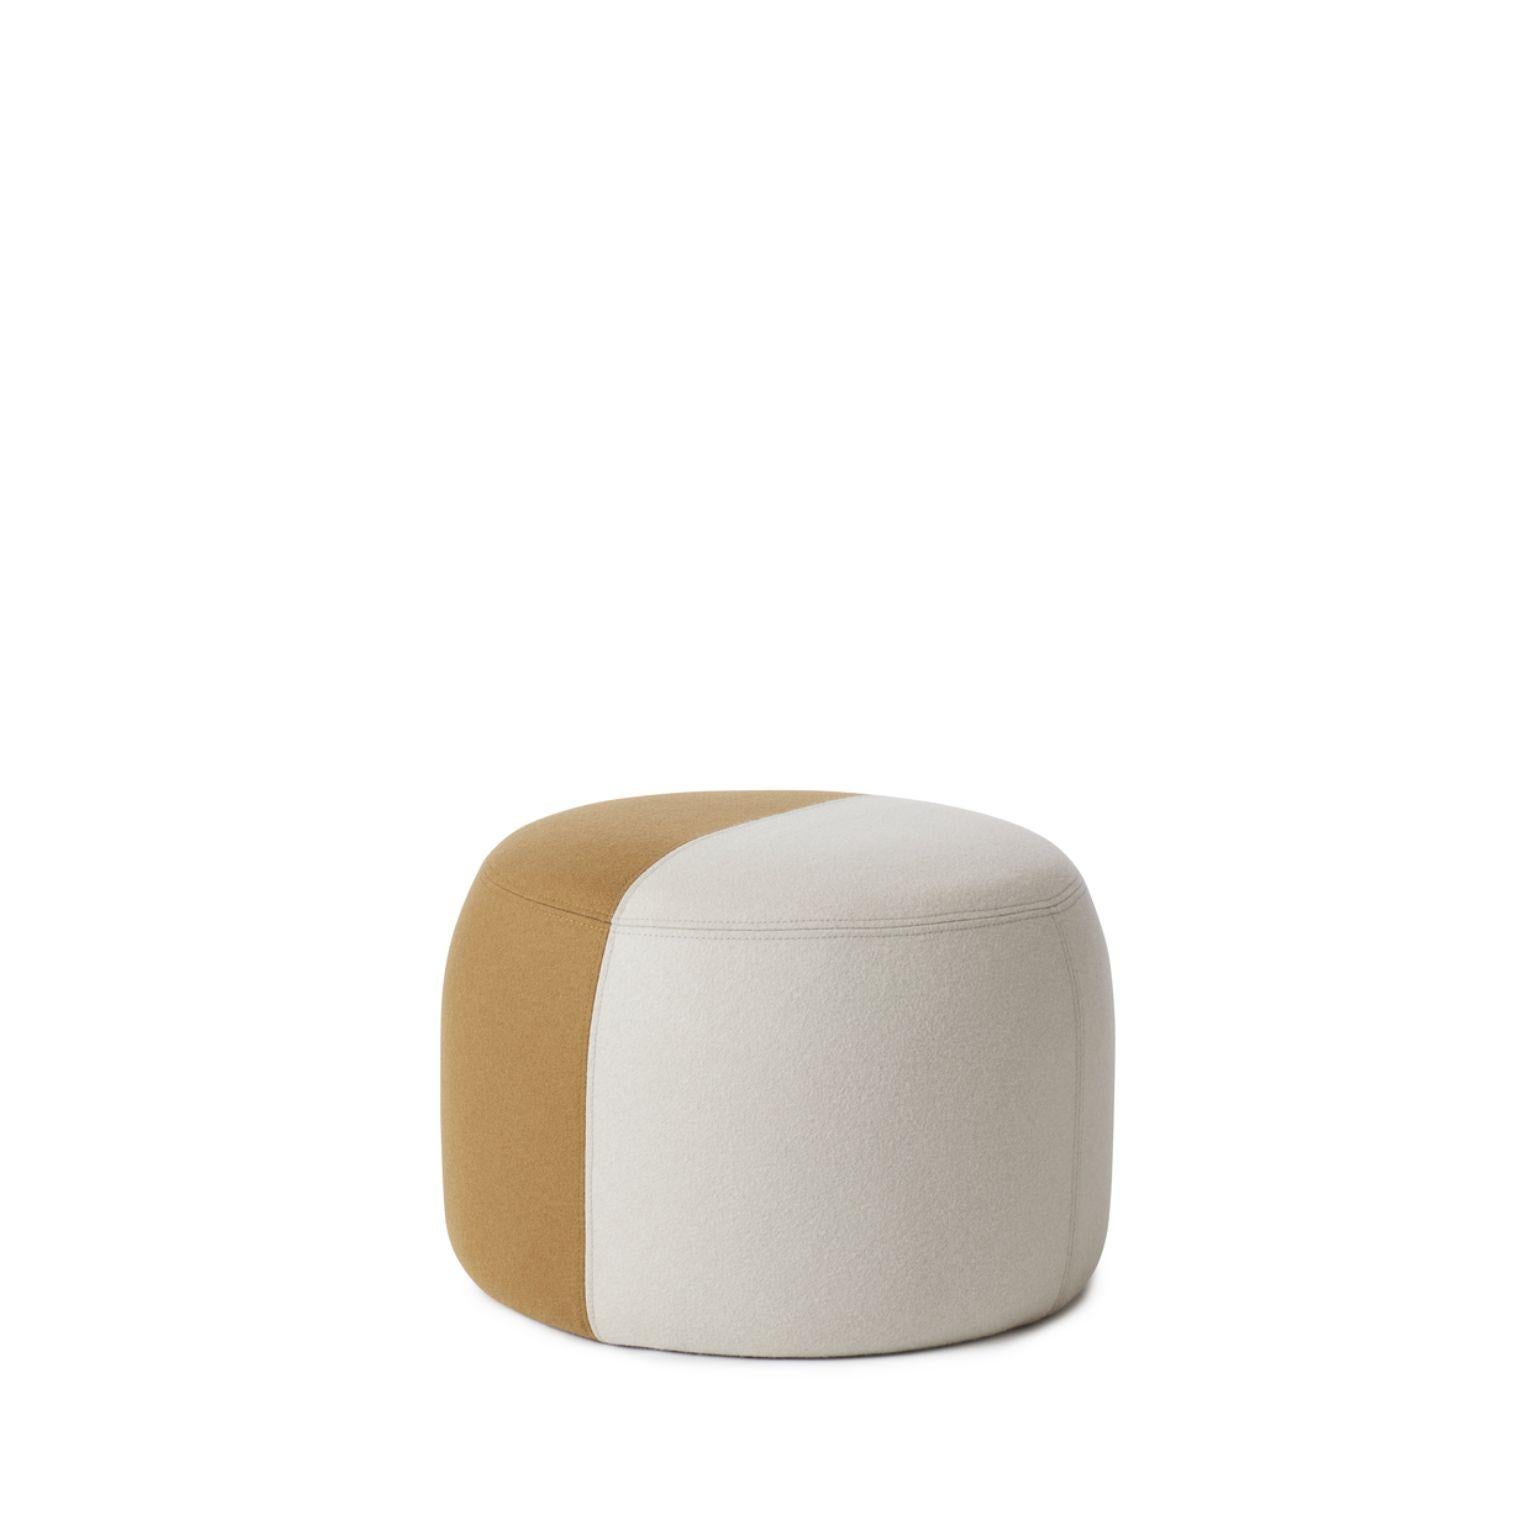 Dainty Pouf pearl grey olive by Warm Nordic
Dimensions: D 55 x H 39 cm
Material: Textile upholstery, Wooden frame, foam.
Weight: 9.5 kg
Also available in different colours and finishes.

Sophisticated, two-coloured pouf with soft shapes and a